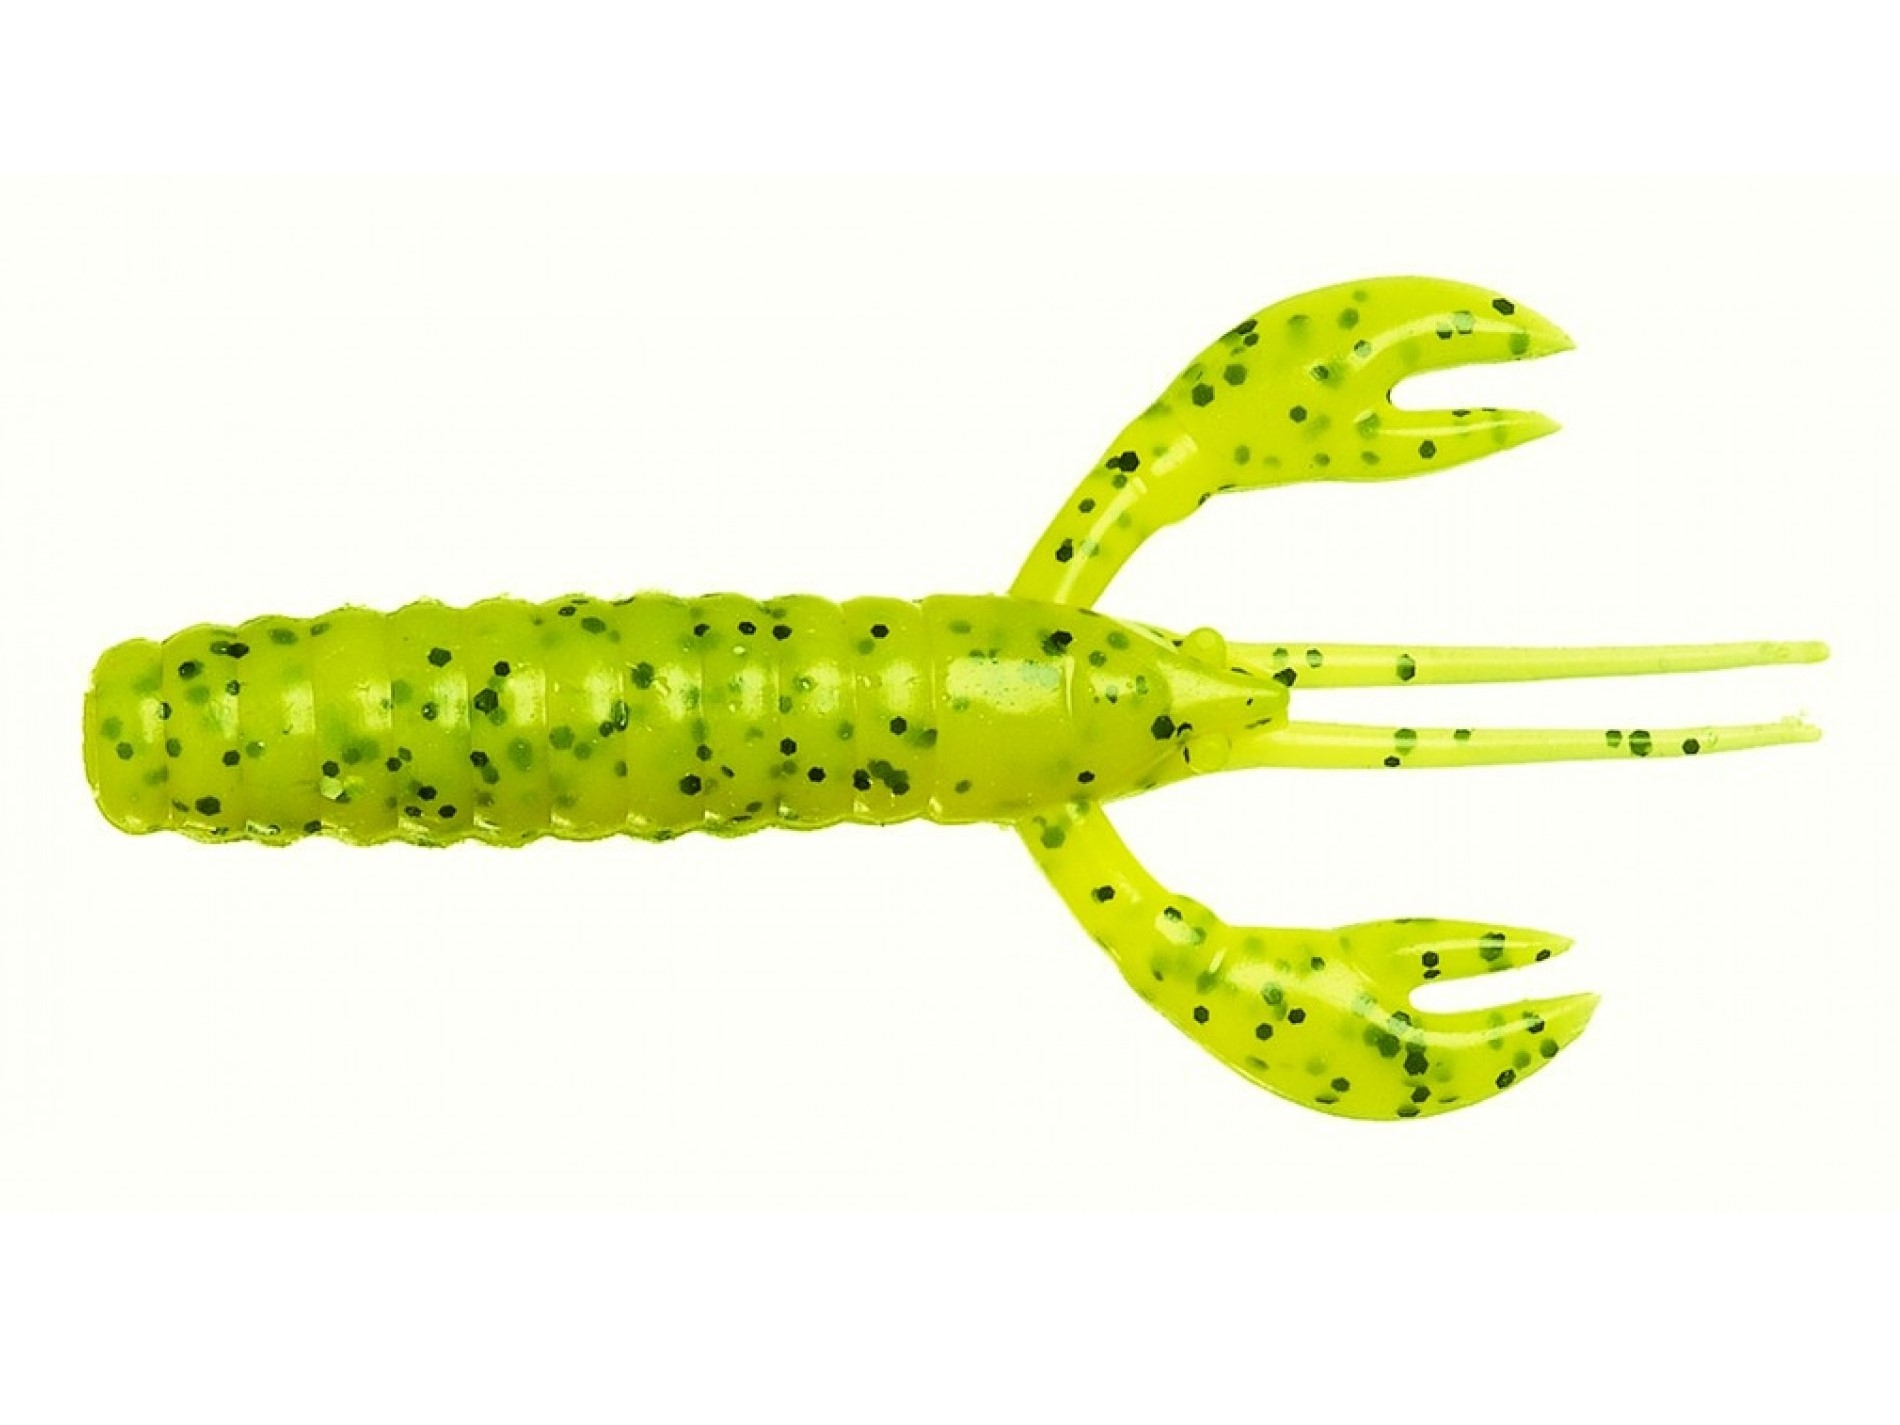 Baby caleo craw 3" col.Chartreuse